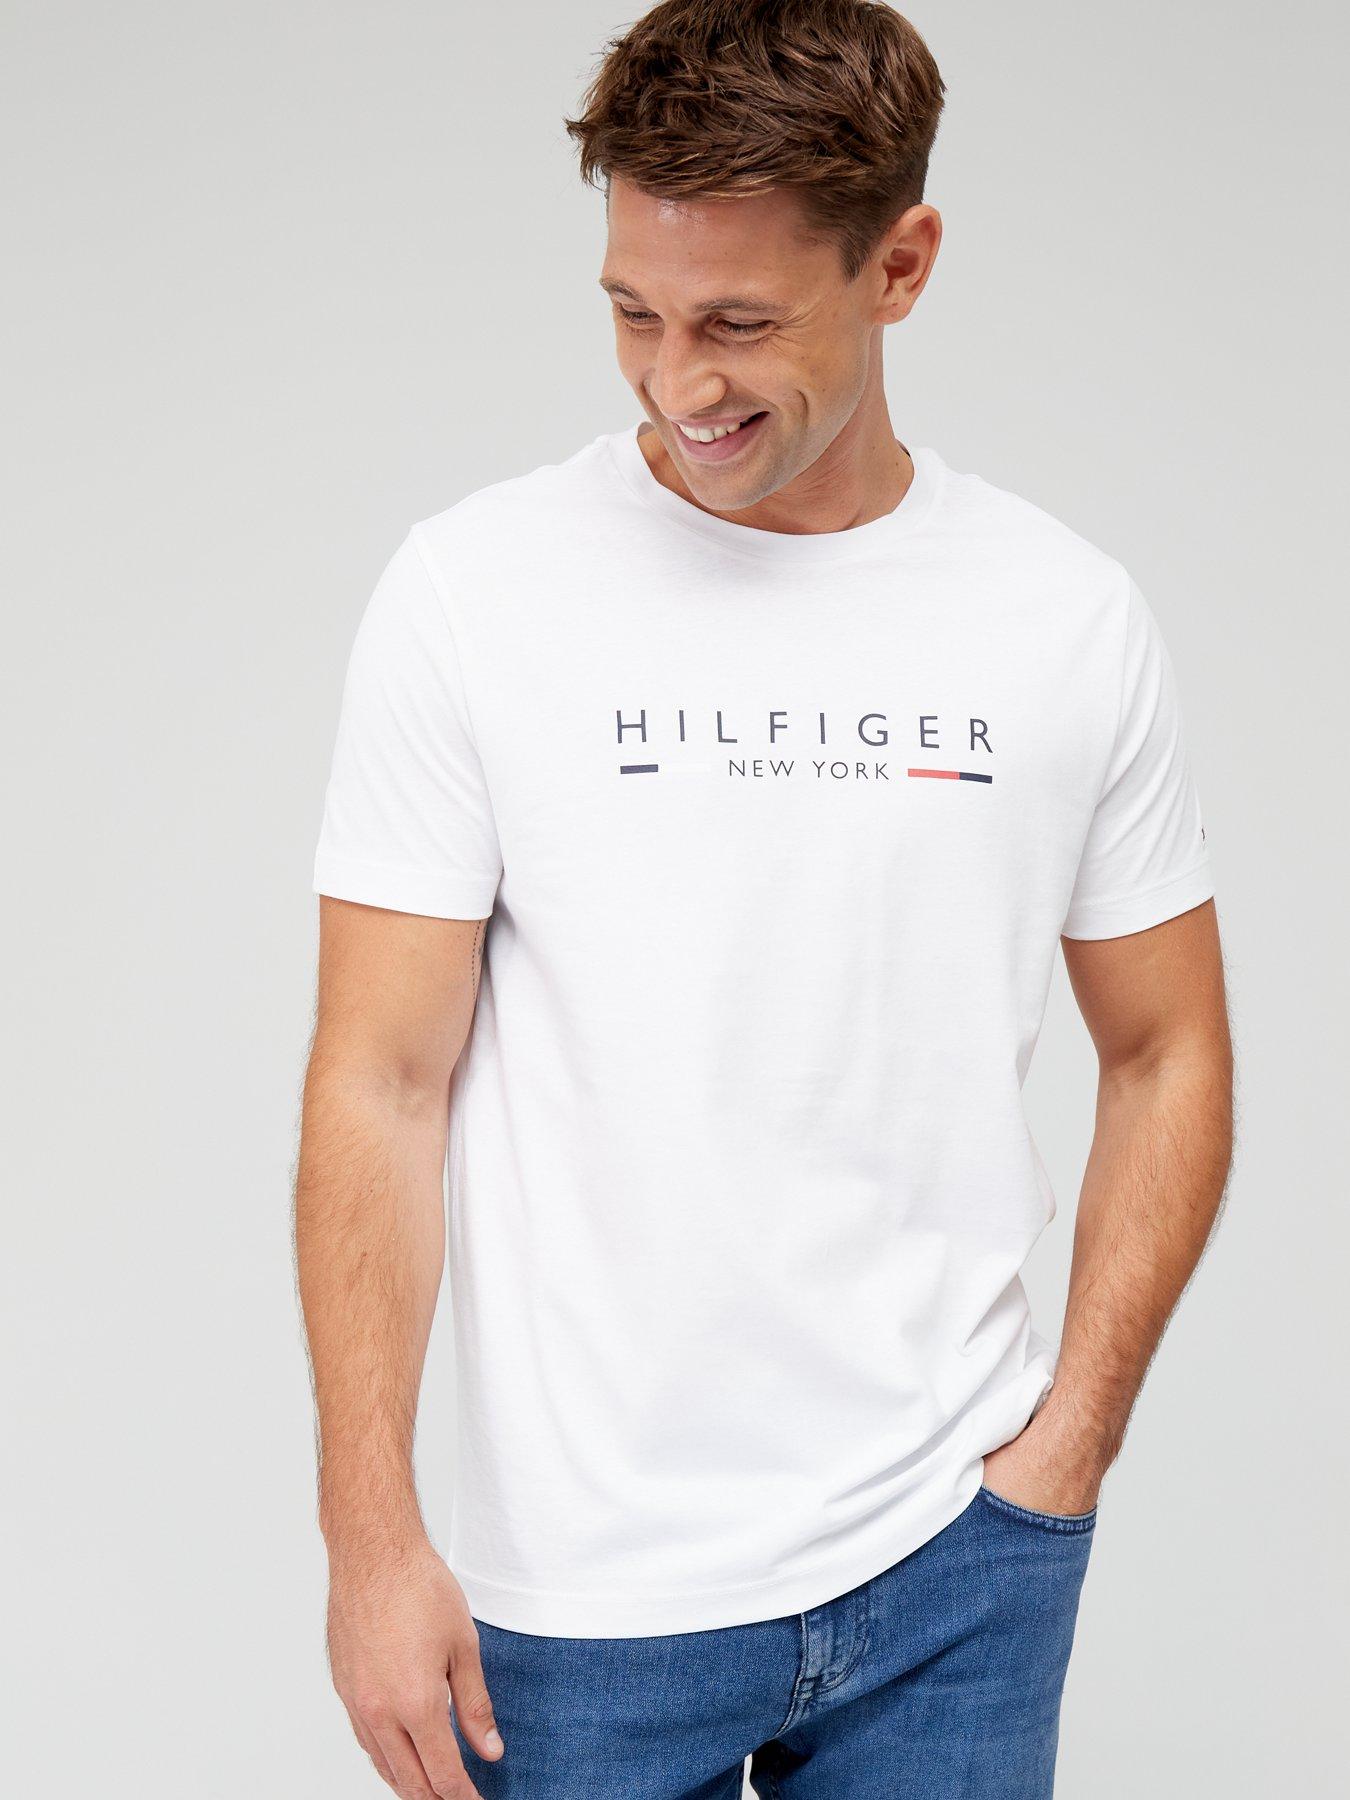 Tommy hilfiger | T-shirts & polos | Men | Very Ireland